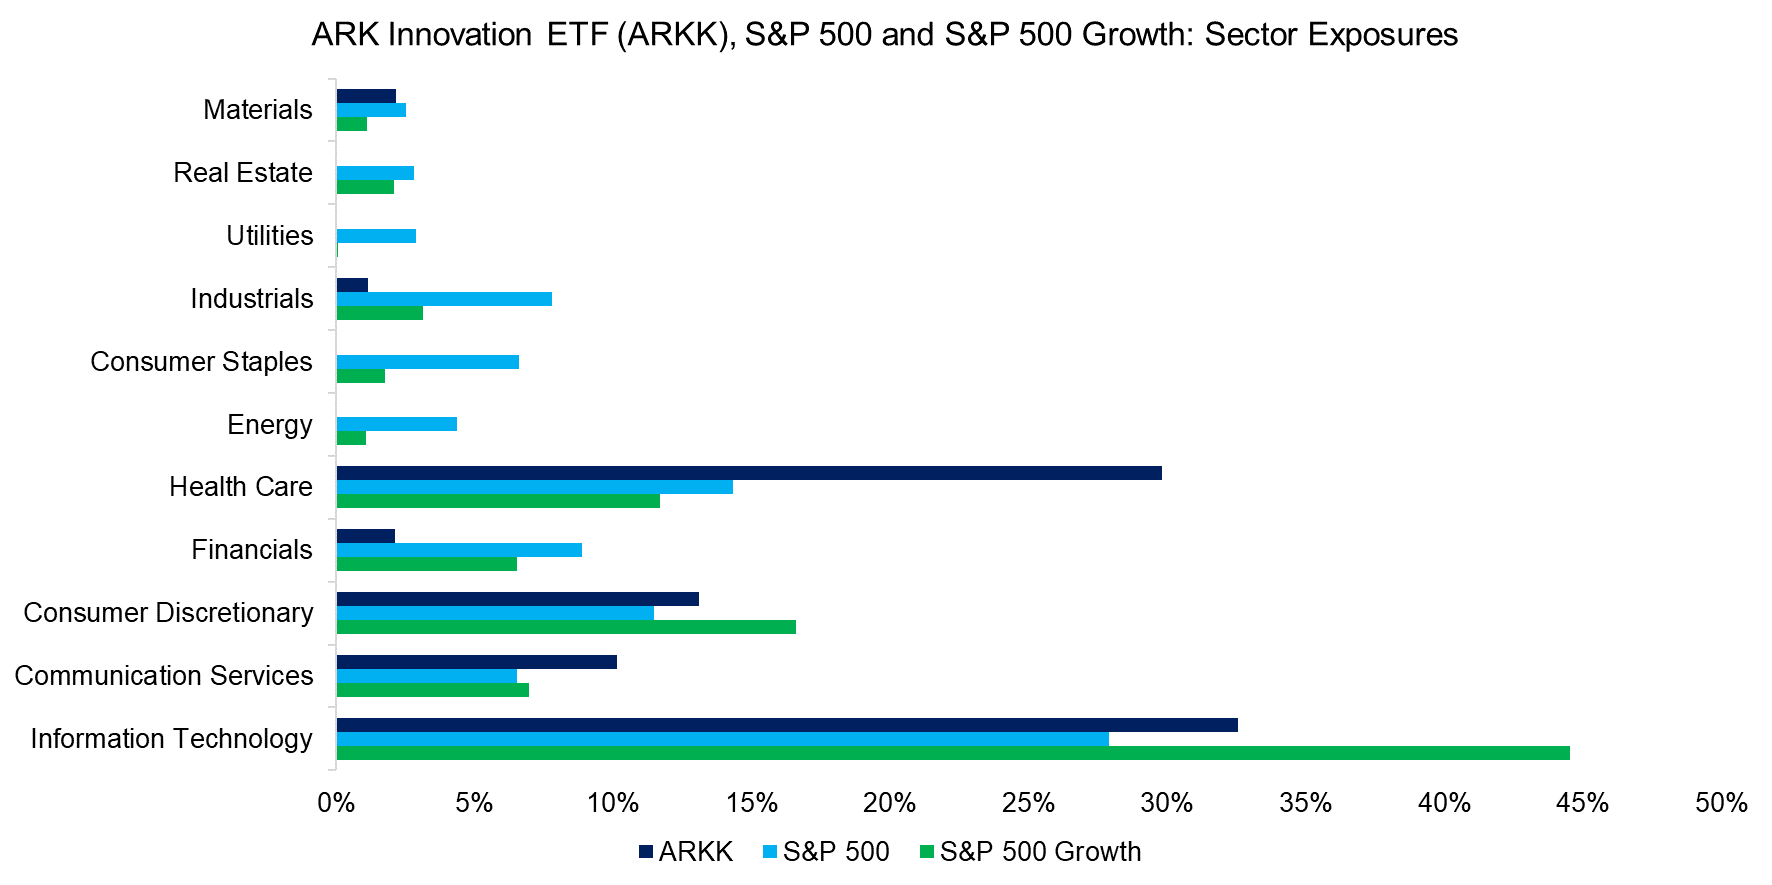 ARK Innovation ETF (ARKK), S&P 500 and S&P 500 Growth Sector Exposures